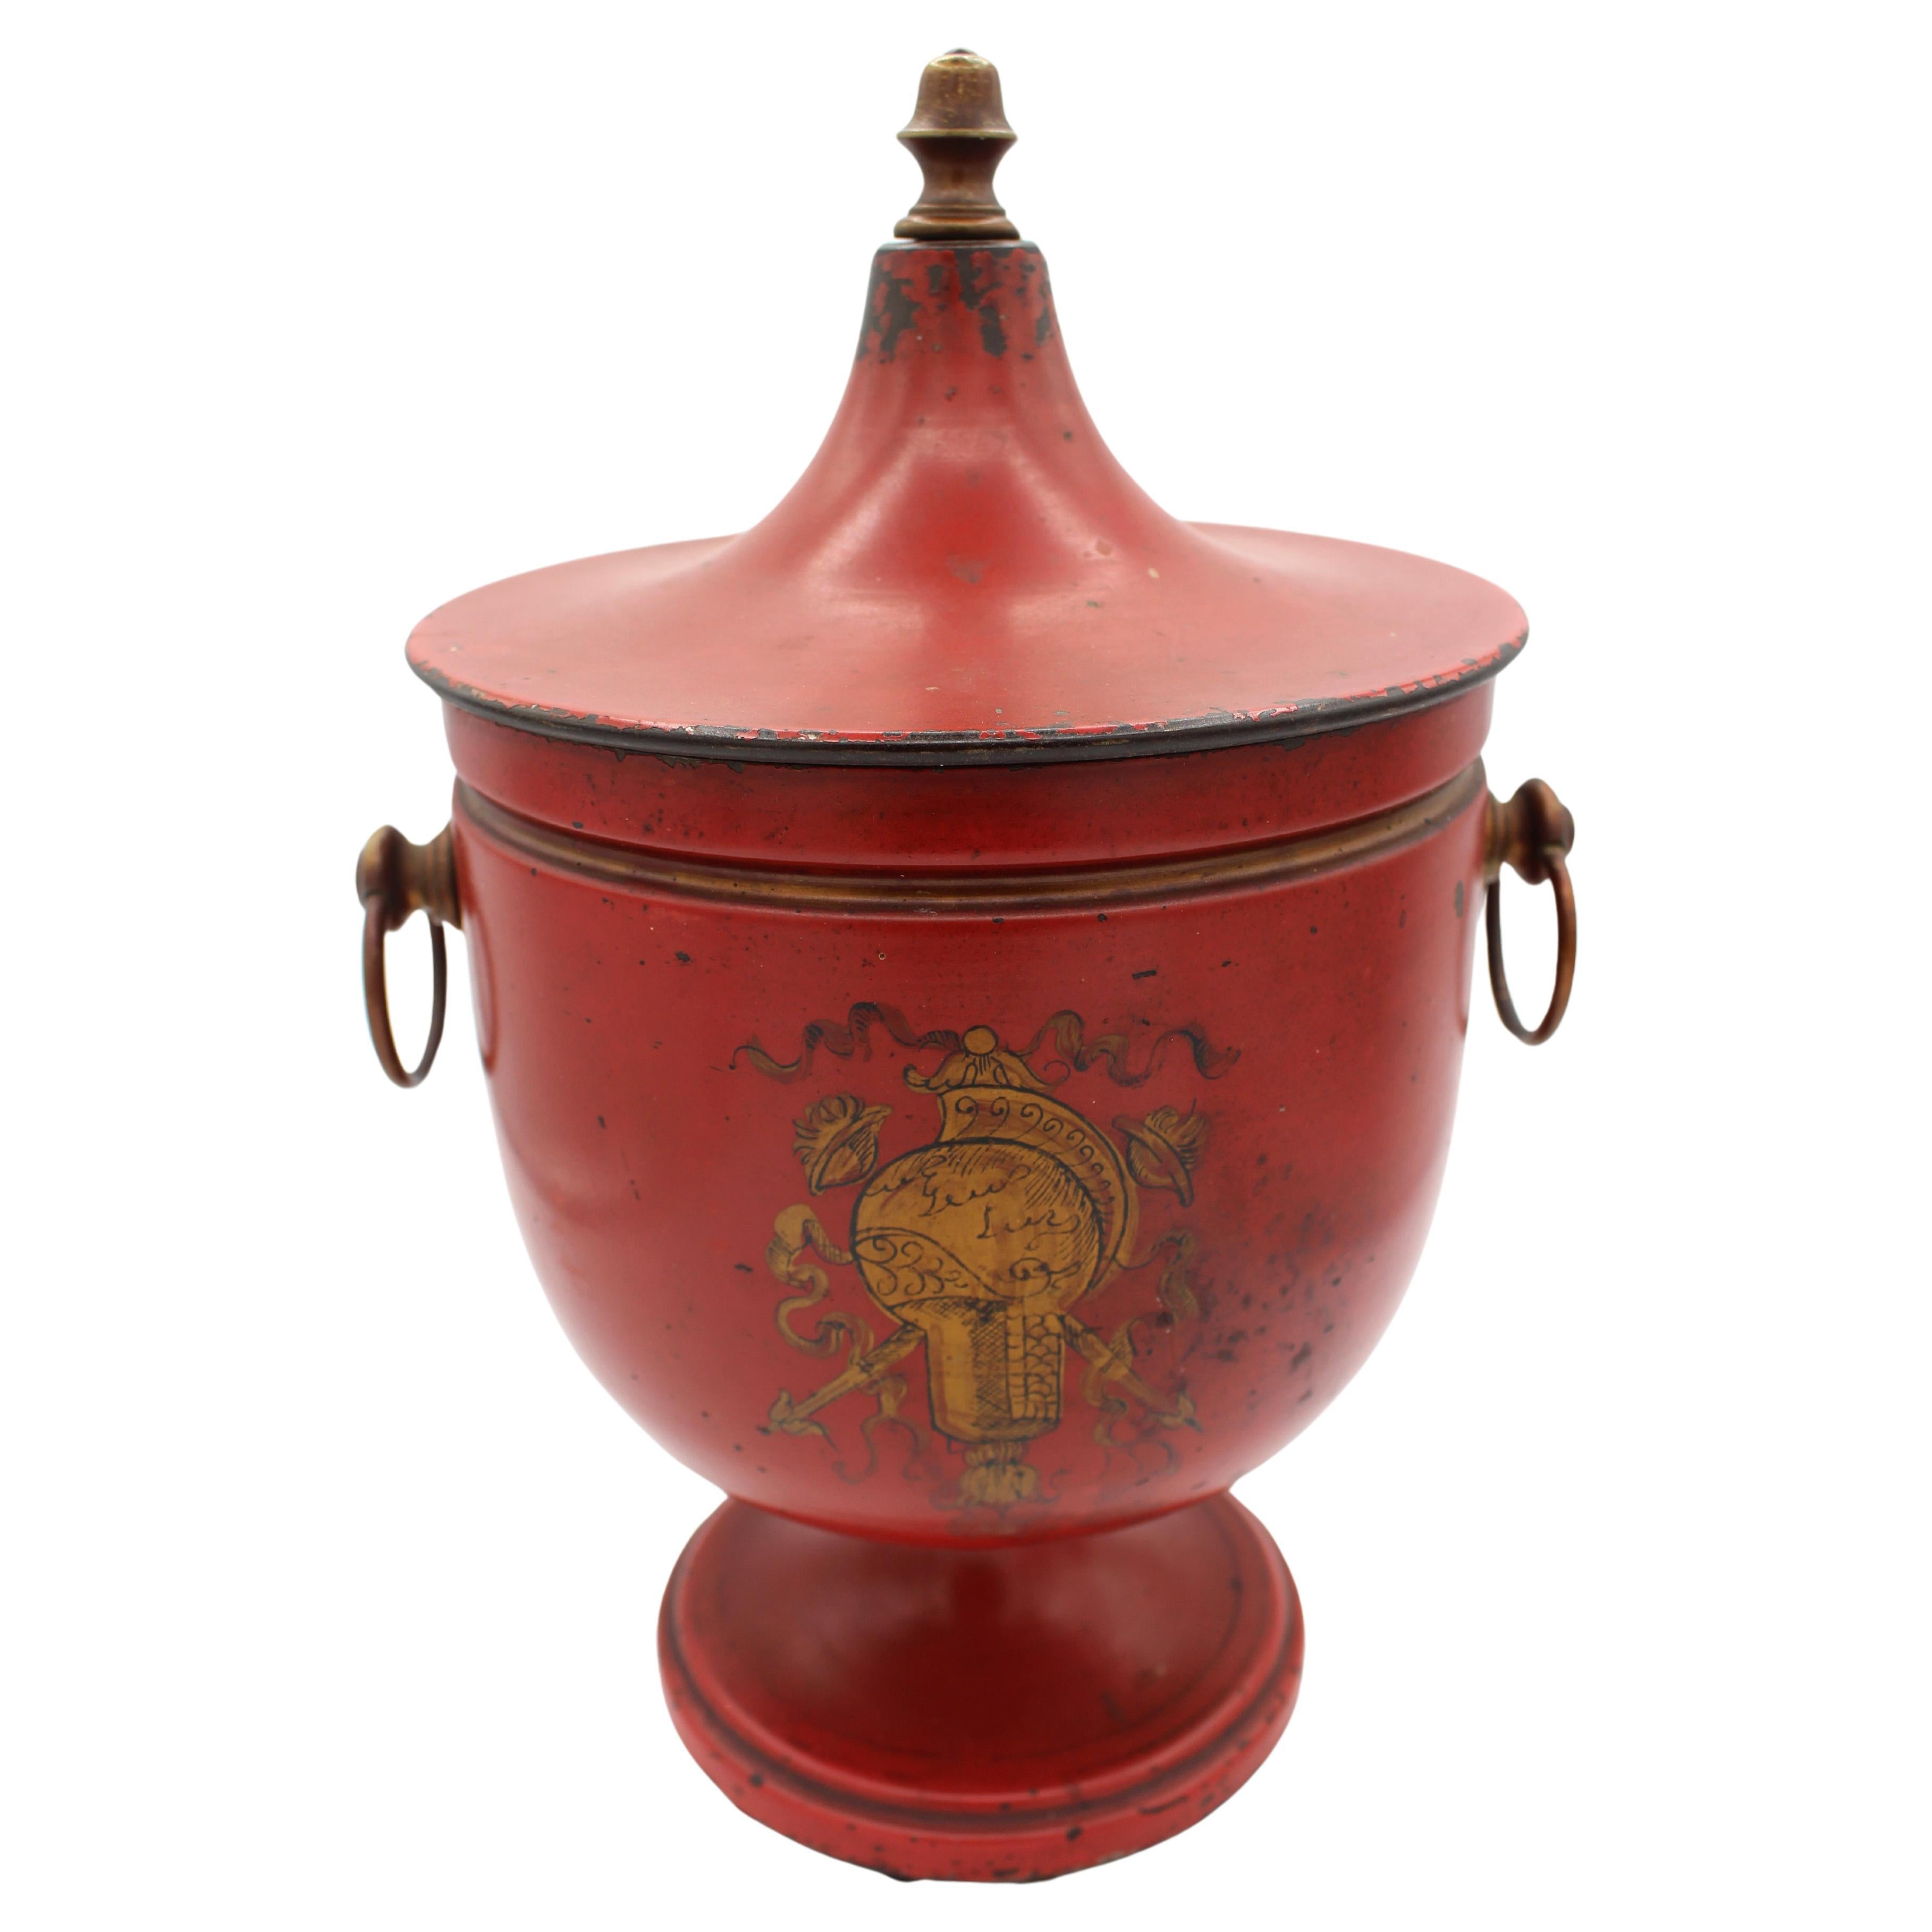 Circa 1880s French Scarlet & Gilt Tole Covered Urn For Sale